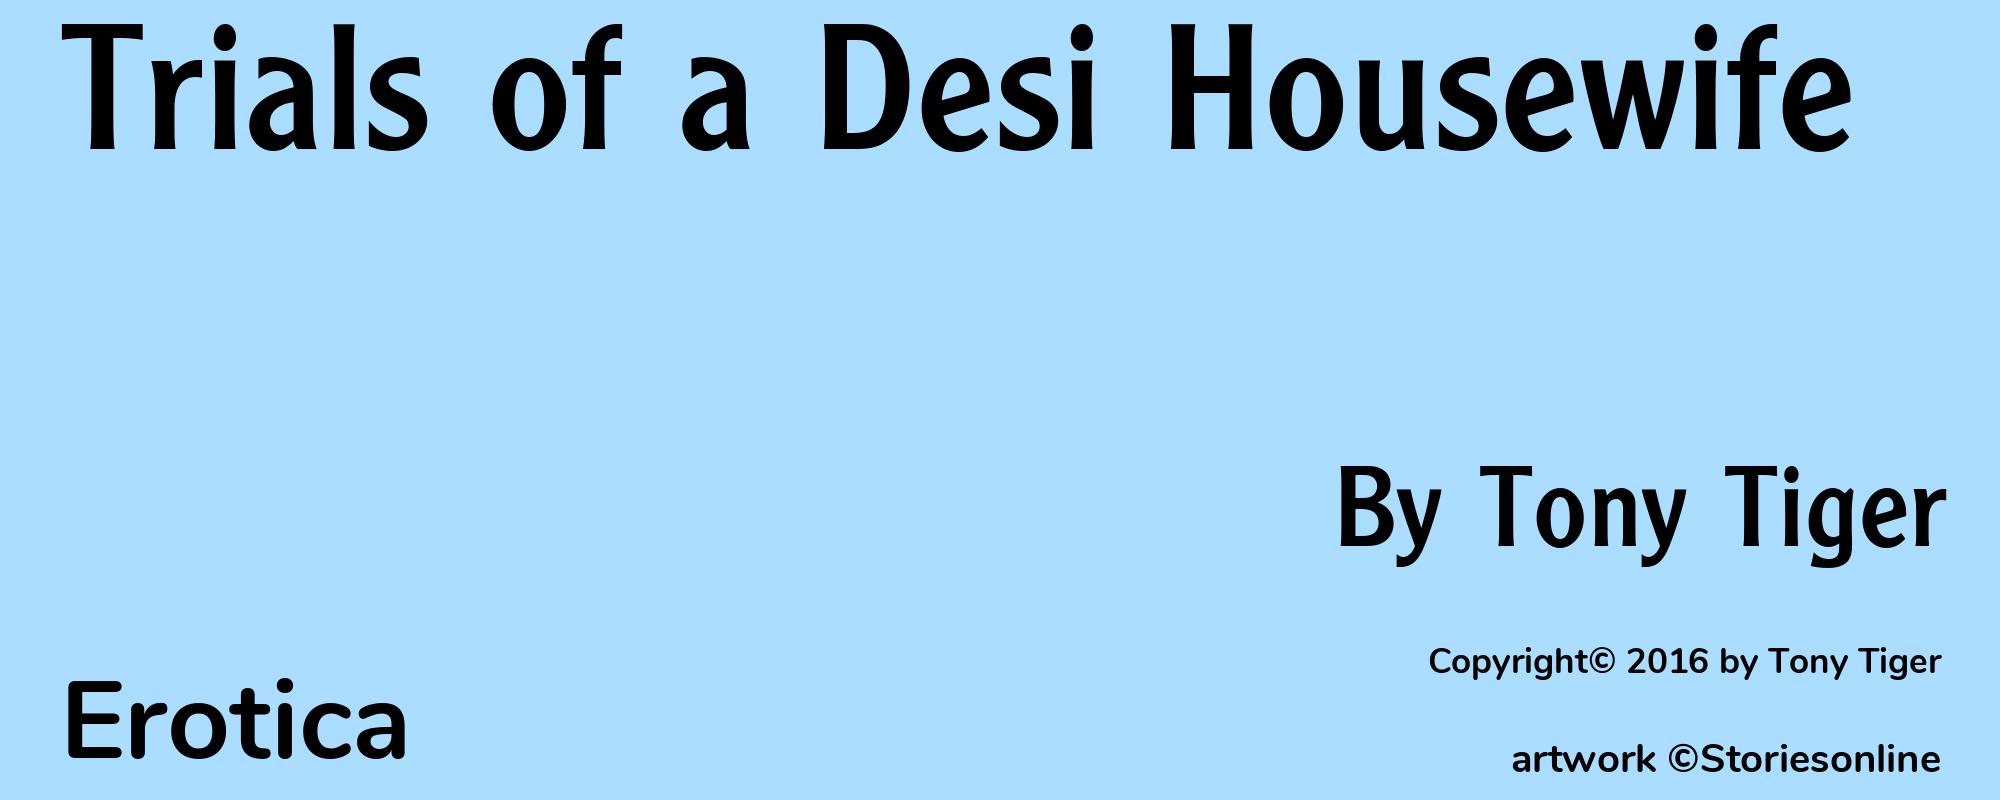 Trials of a Desi Housewife - Cover